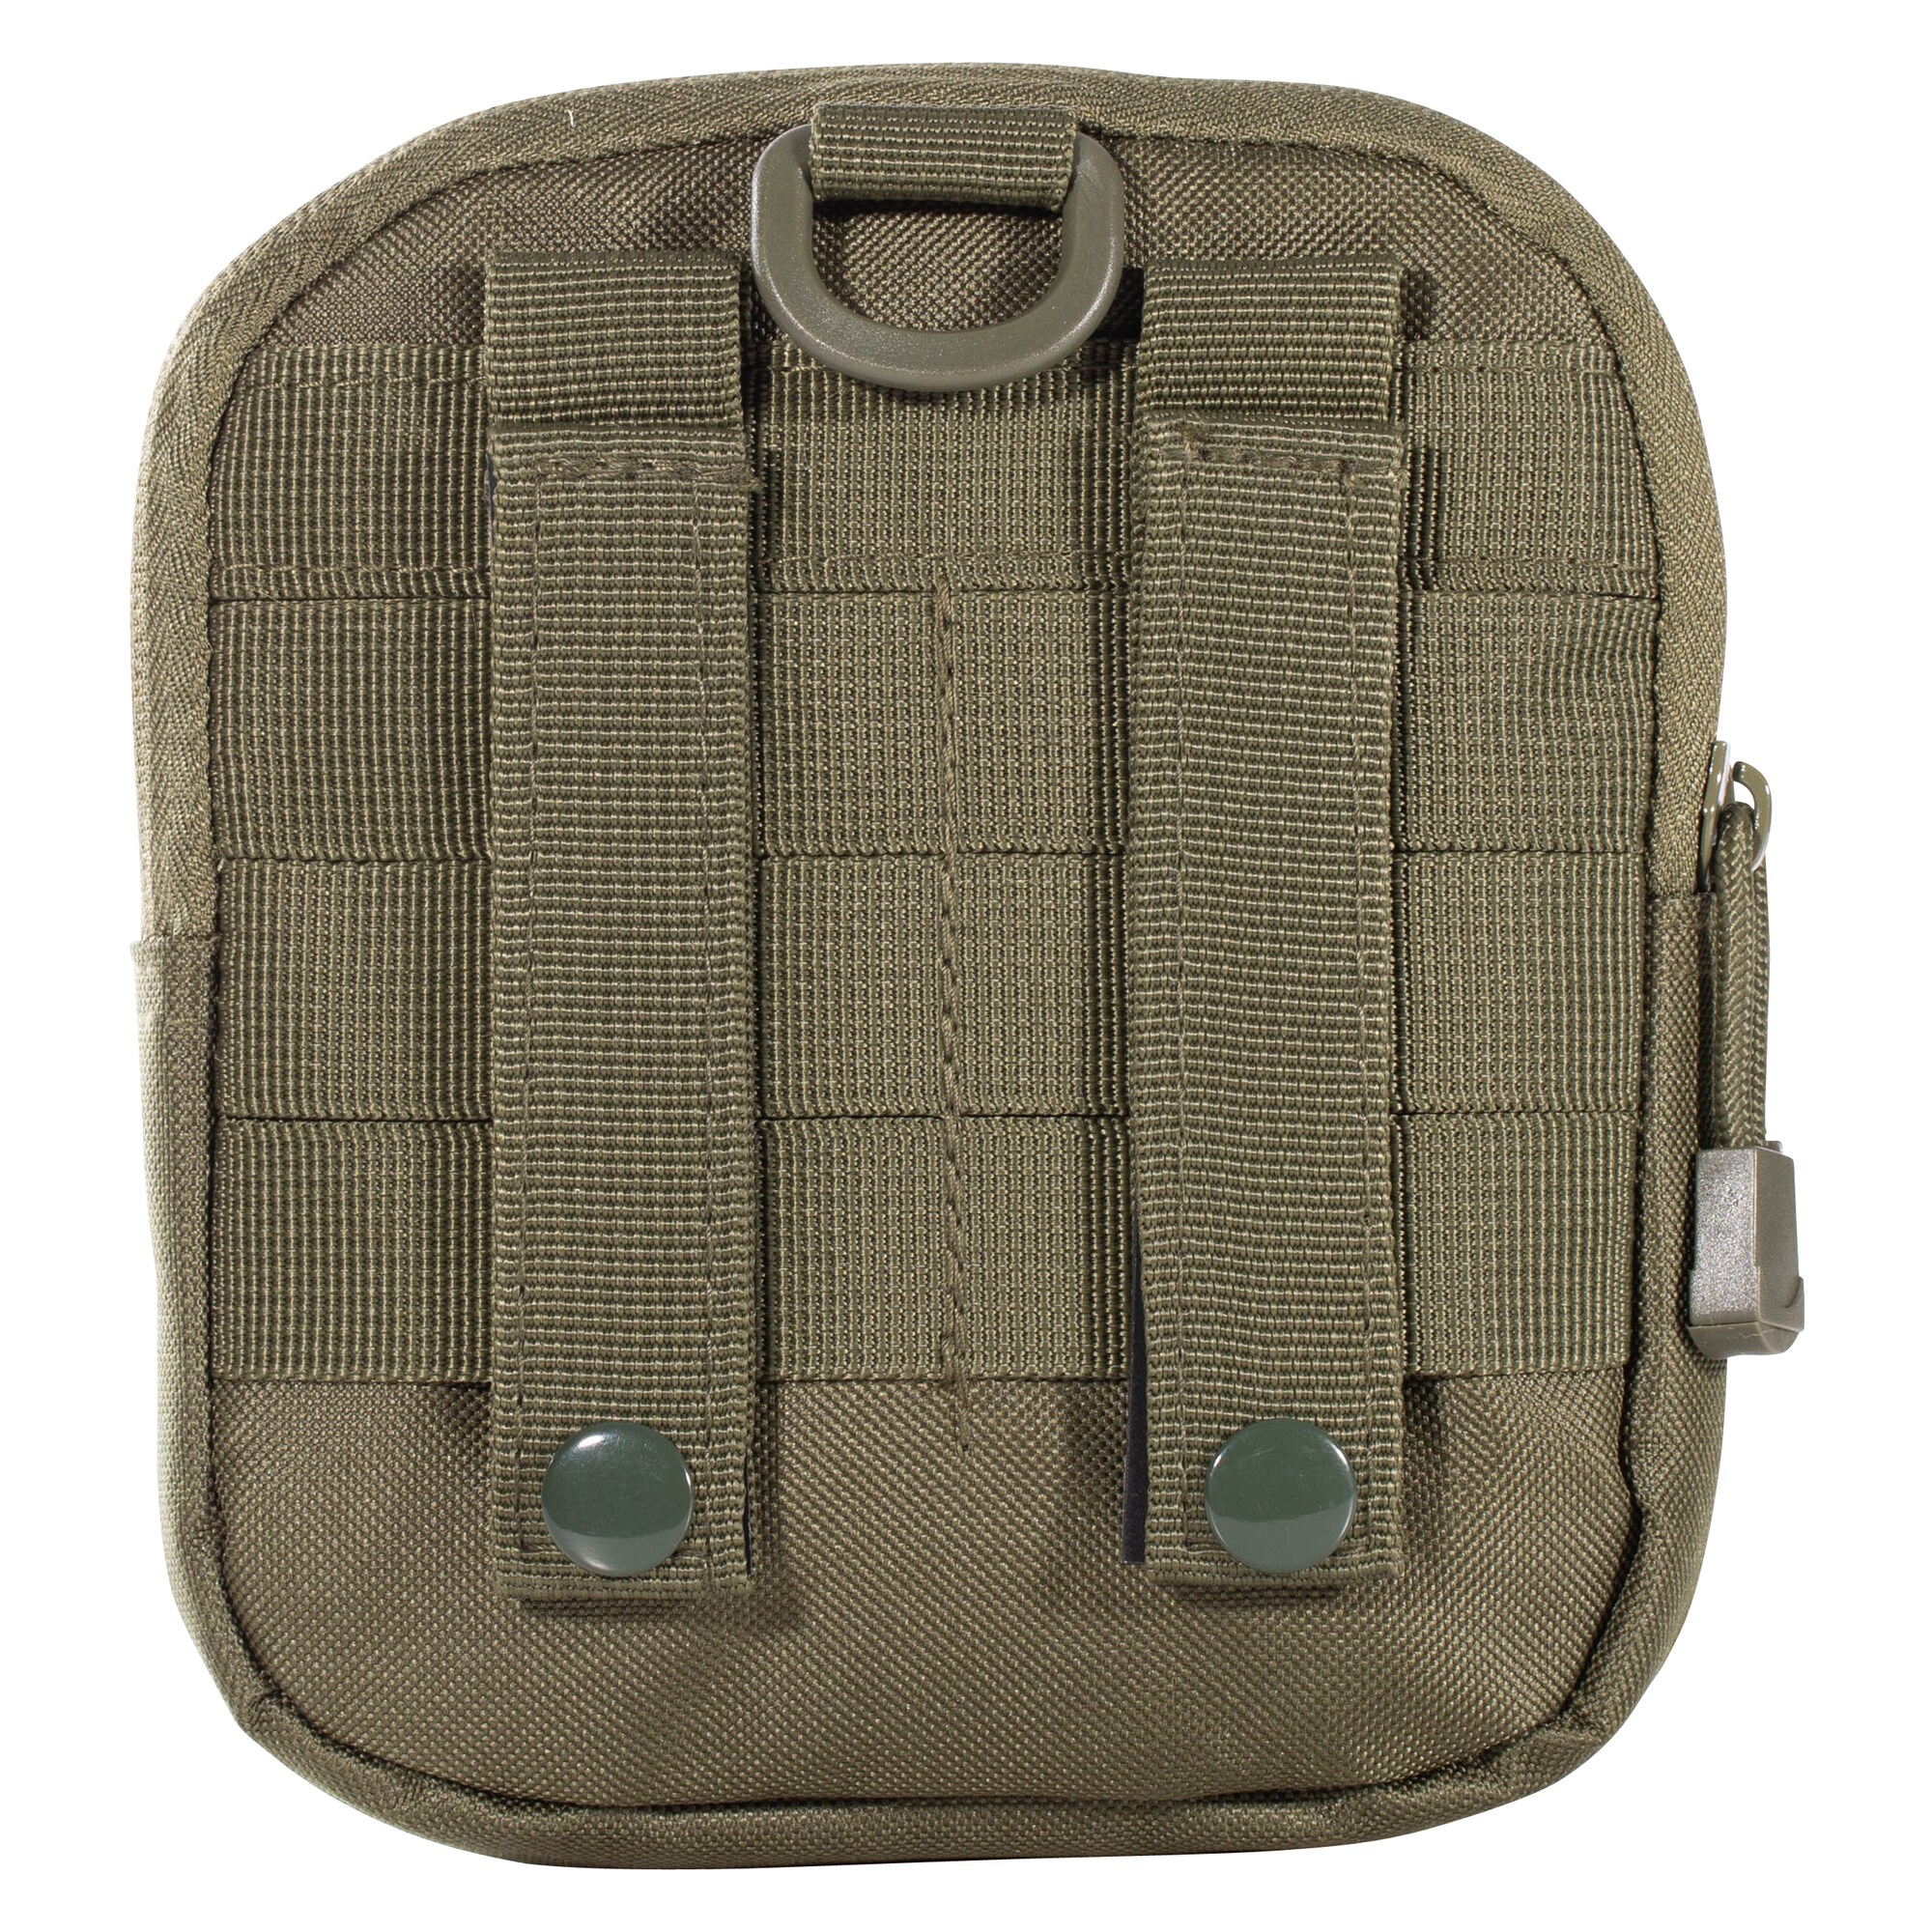 Molle Pouch Functional Tasche oliv